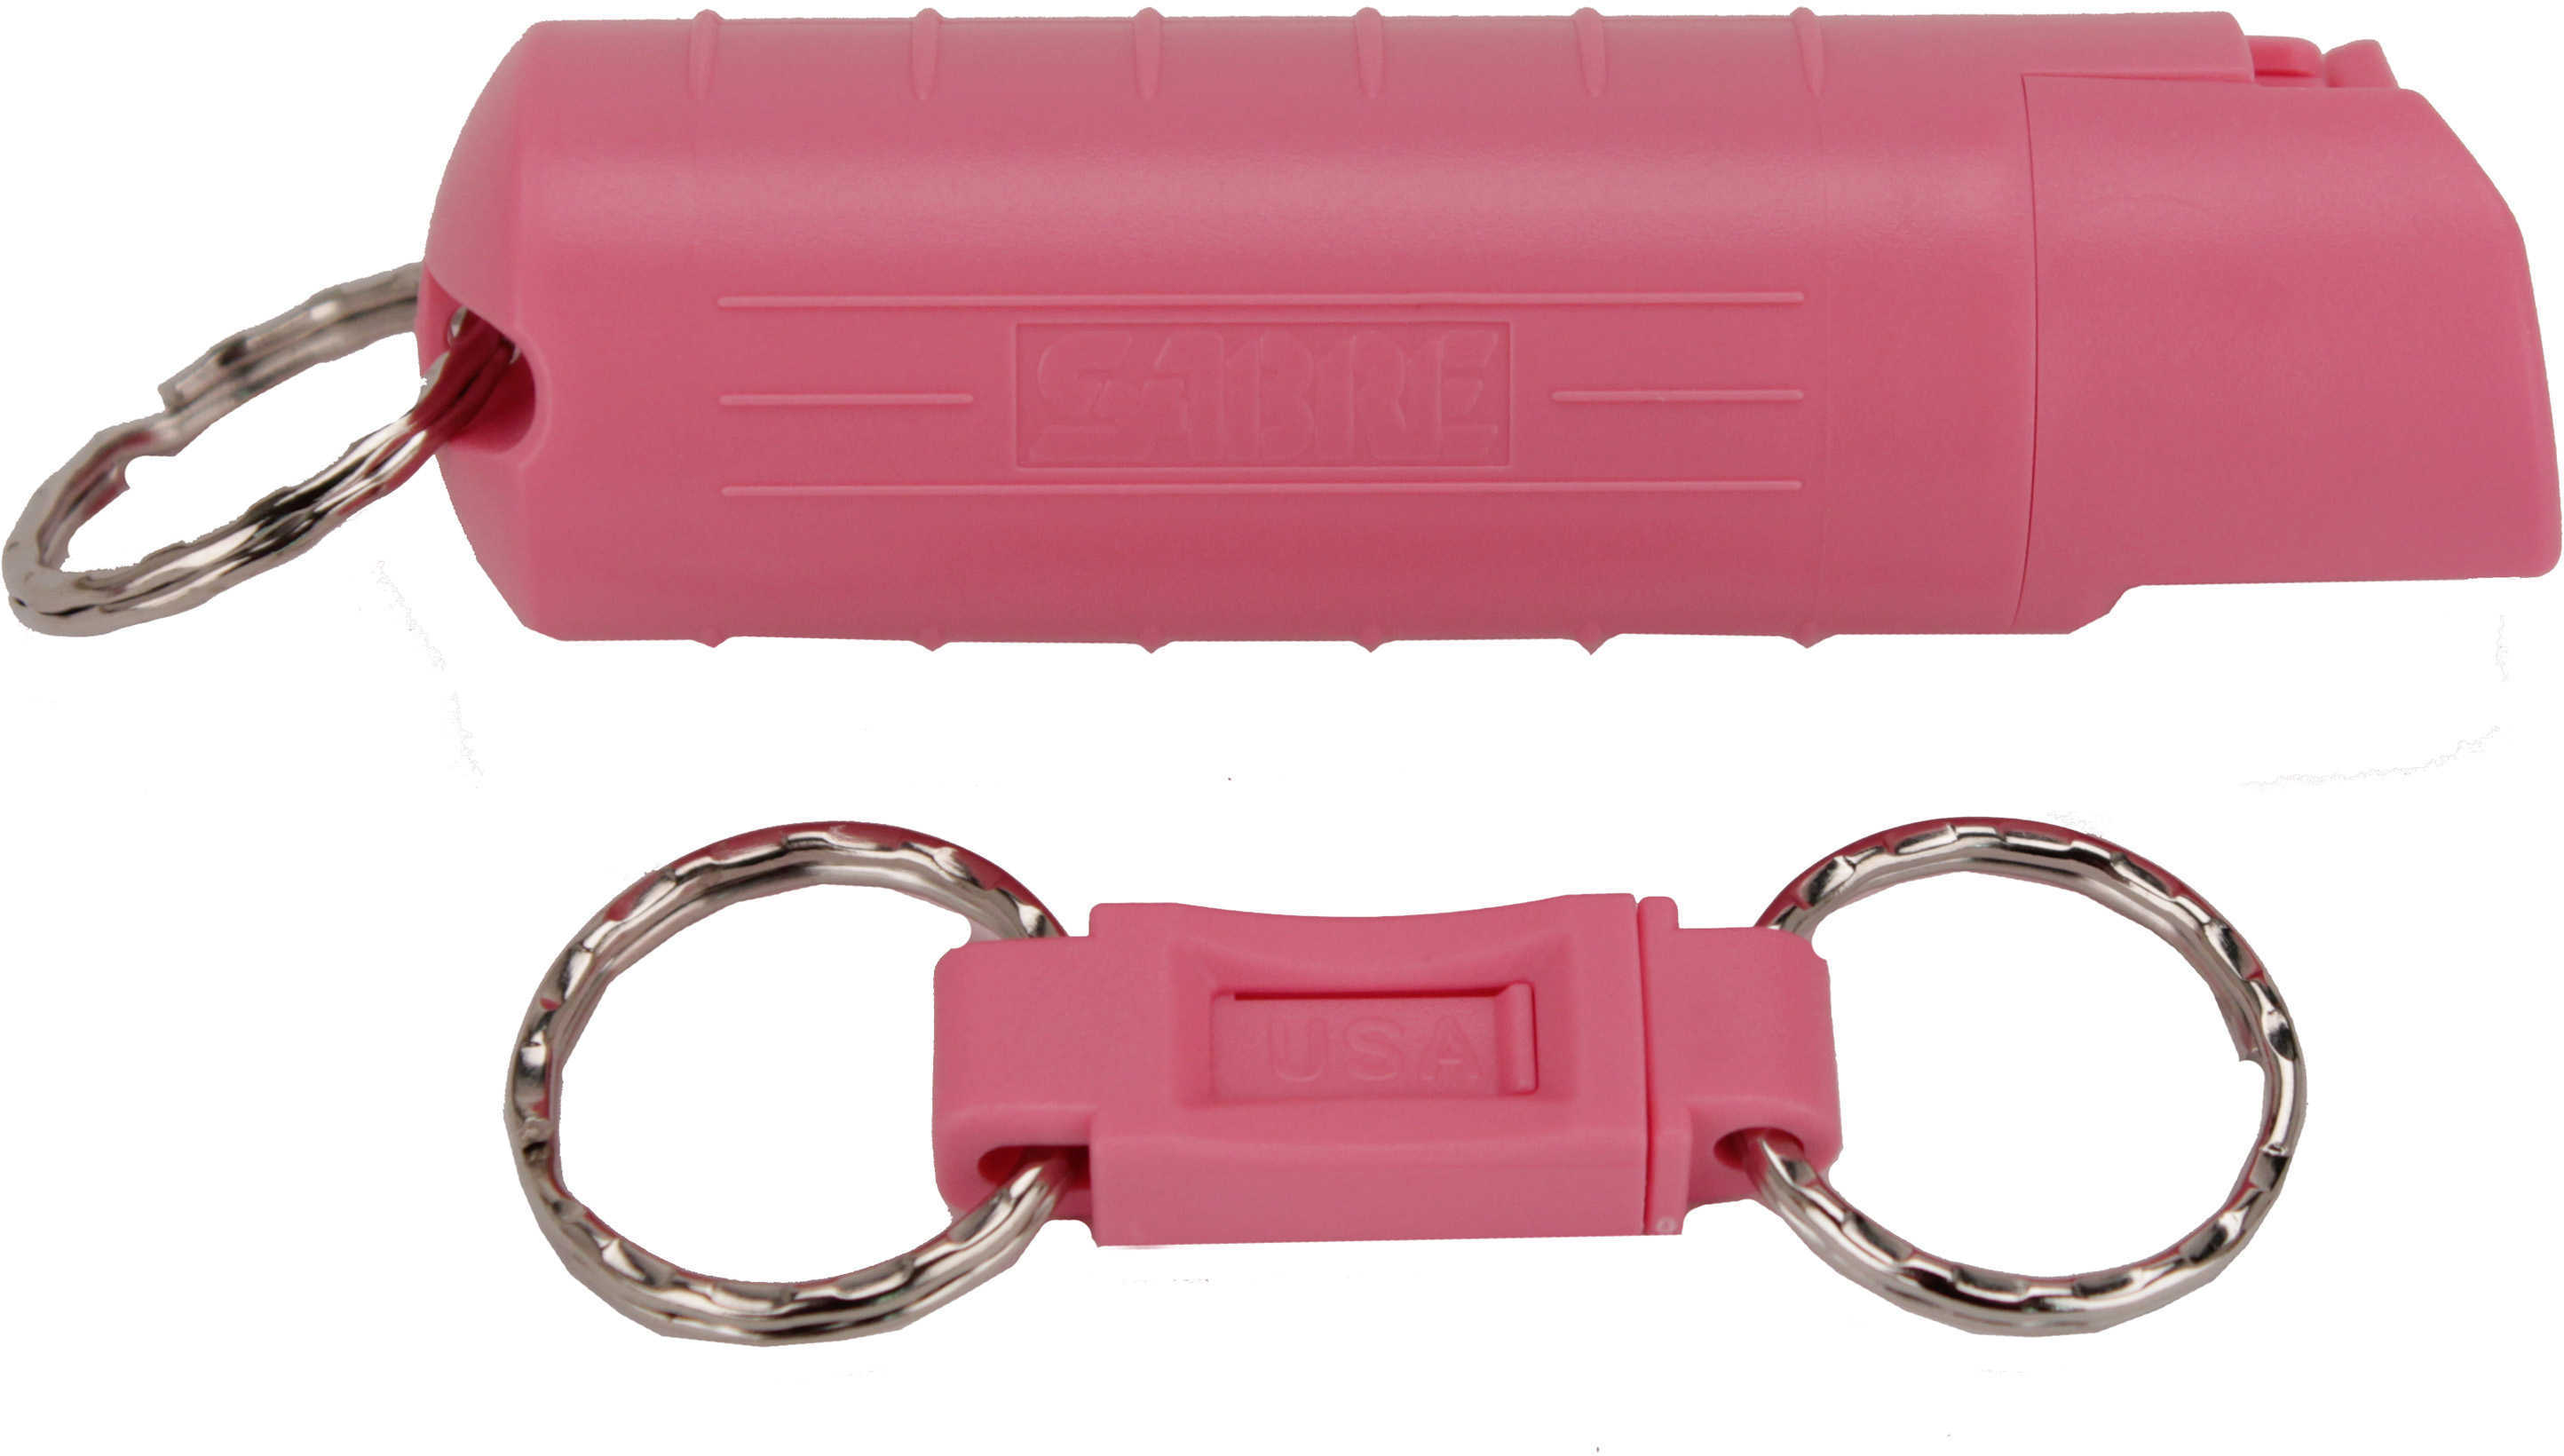 NBCF Sabre Red Pink Hardcase Pepper Spray Will Make a Donation To The National Breast Cancer Foundation For Every